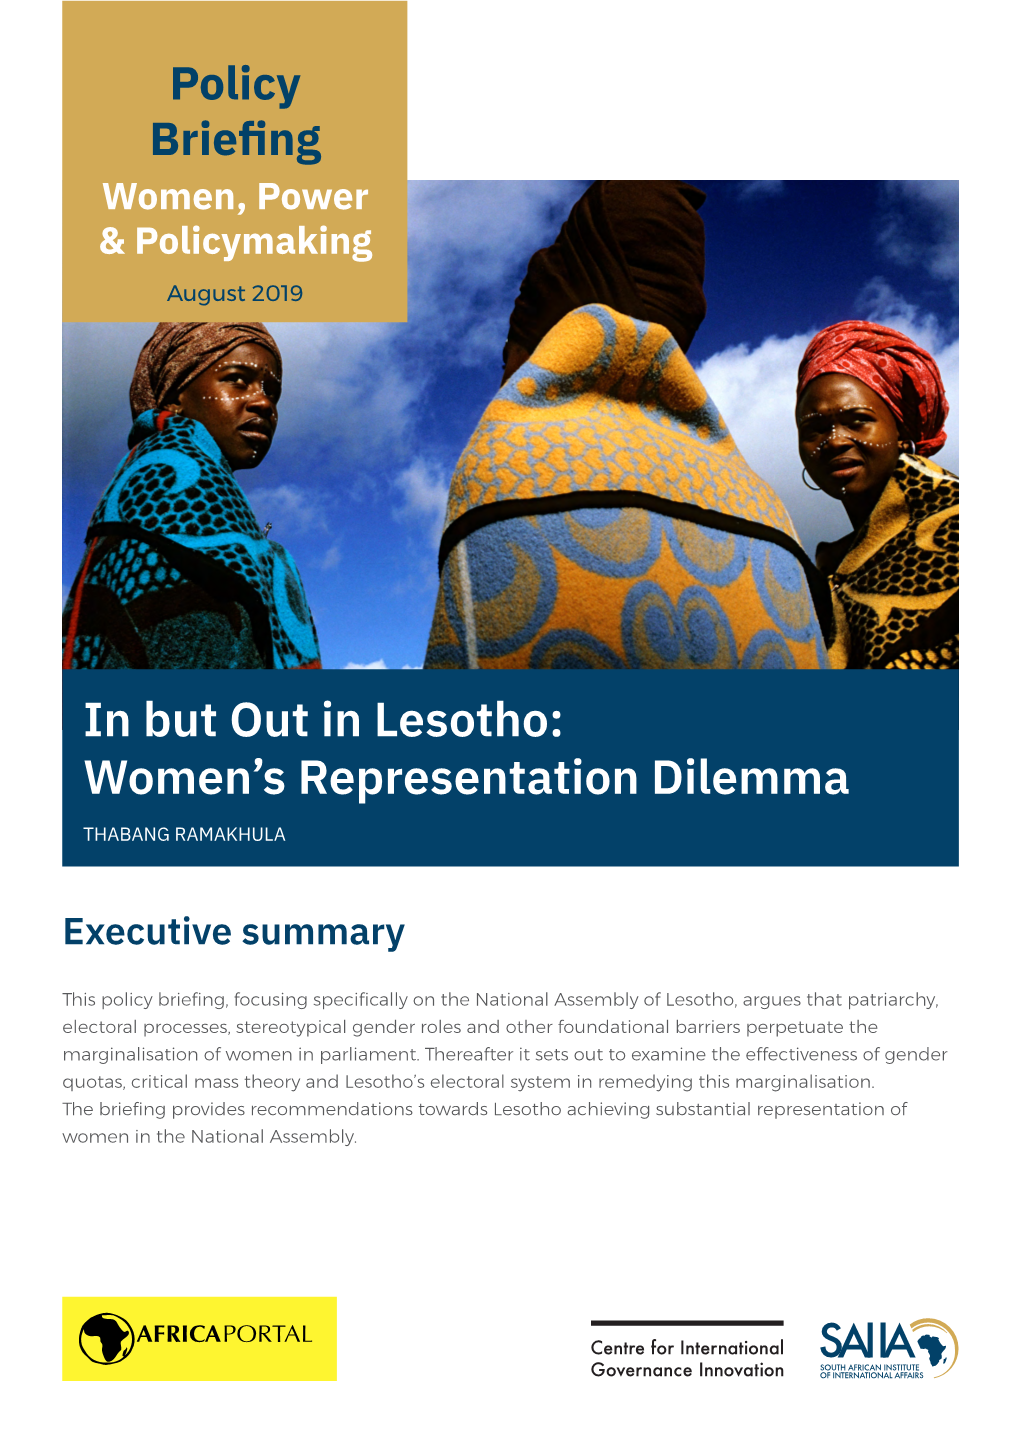 In but out in Lesotho: Women's Representation Dilemma